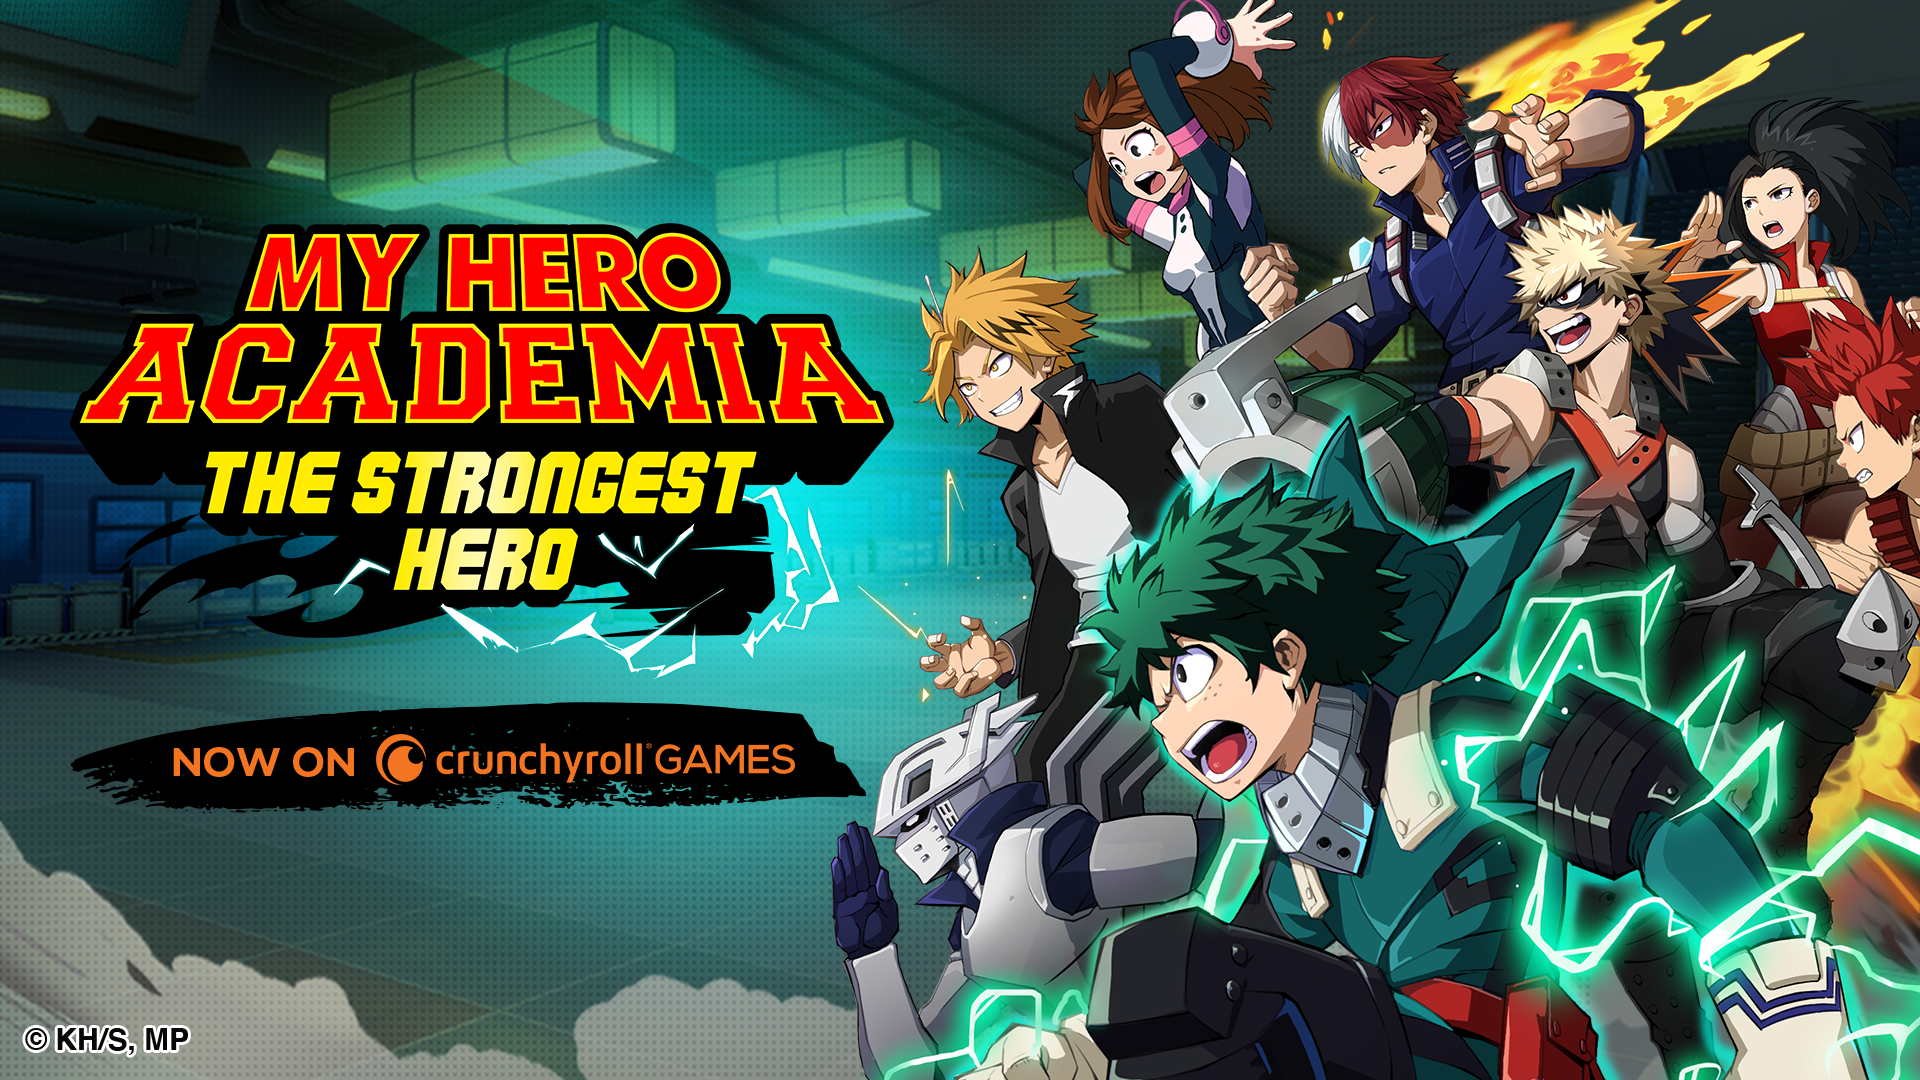 My Hero Academia: The Strongest Hero on X: We can't wait to see you at  Crunchyroll Expo, Heroes!! 🔥 Join us from Aug 5-7 at Crunchyroll Games  booth 1615 to get a